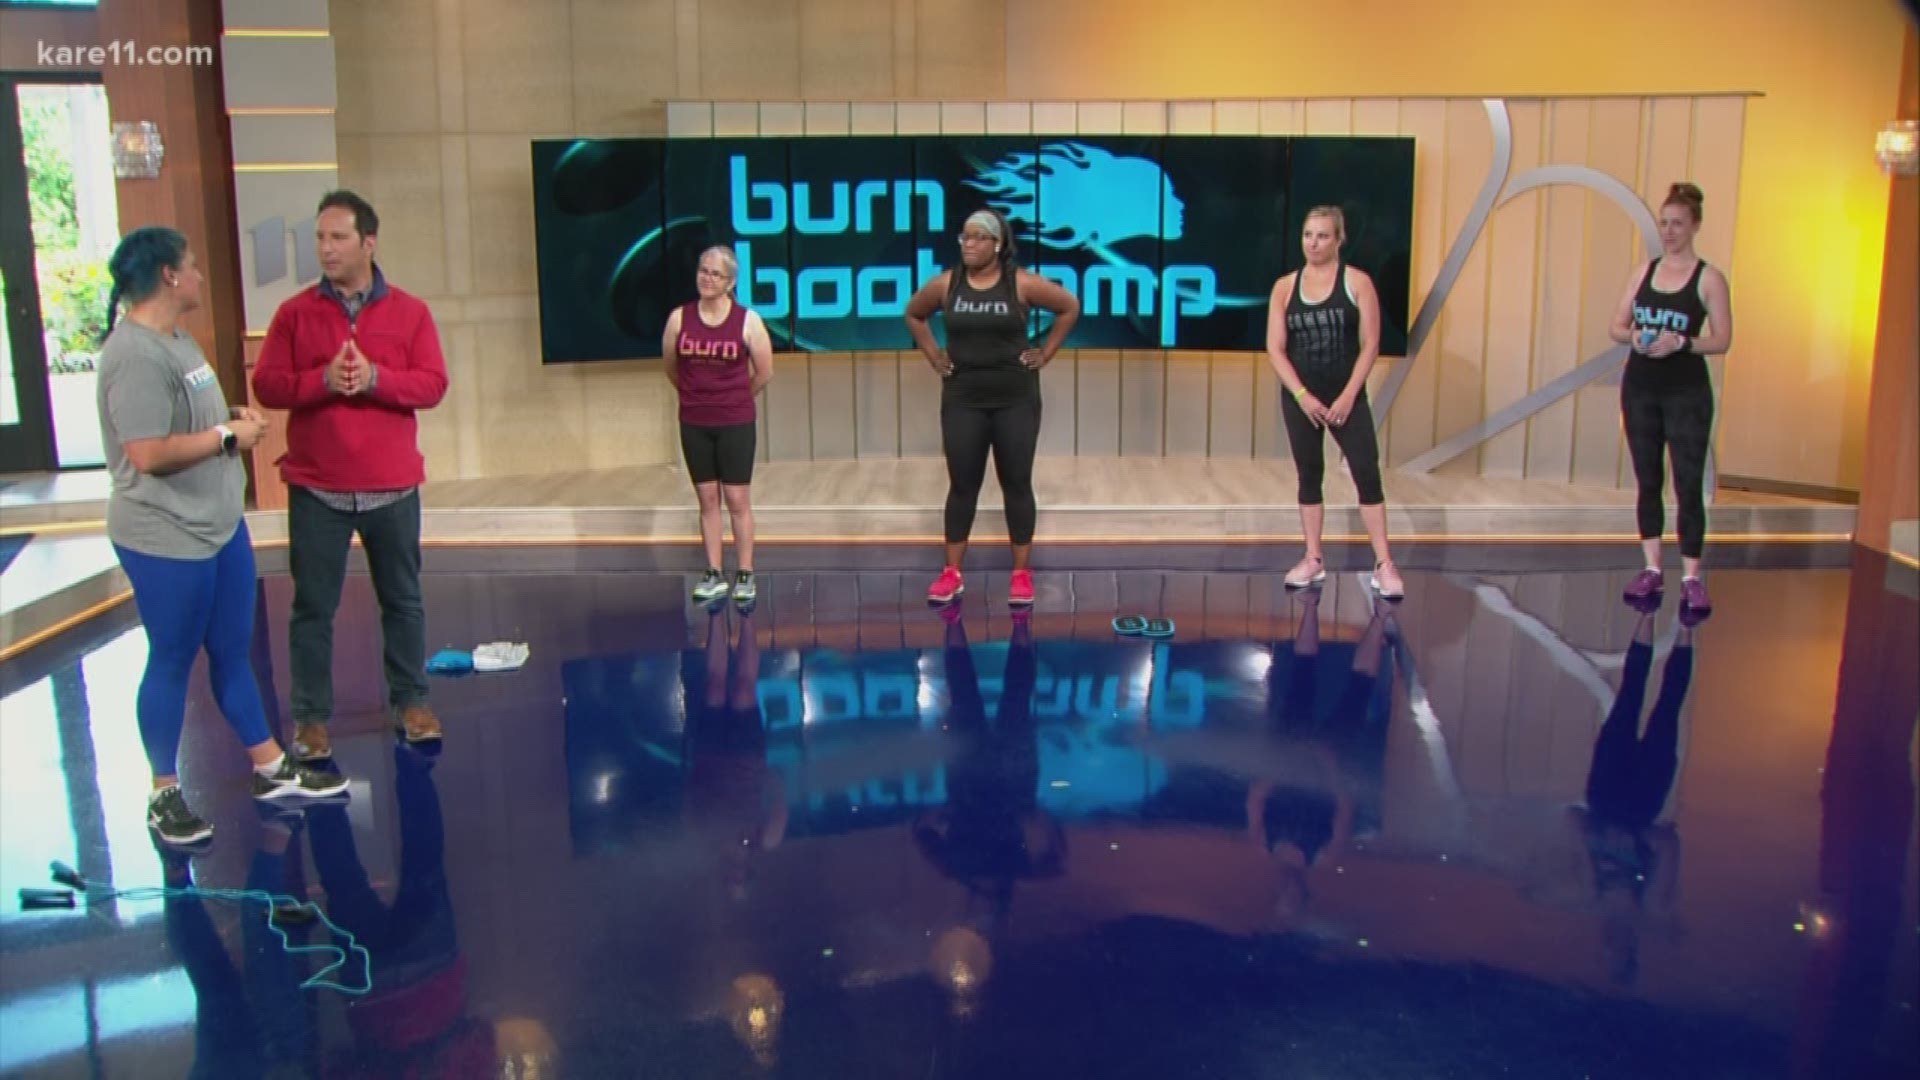 Burn Boot Camp offers some health and wellness tips for when life gets a little crazy.